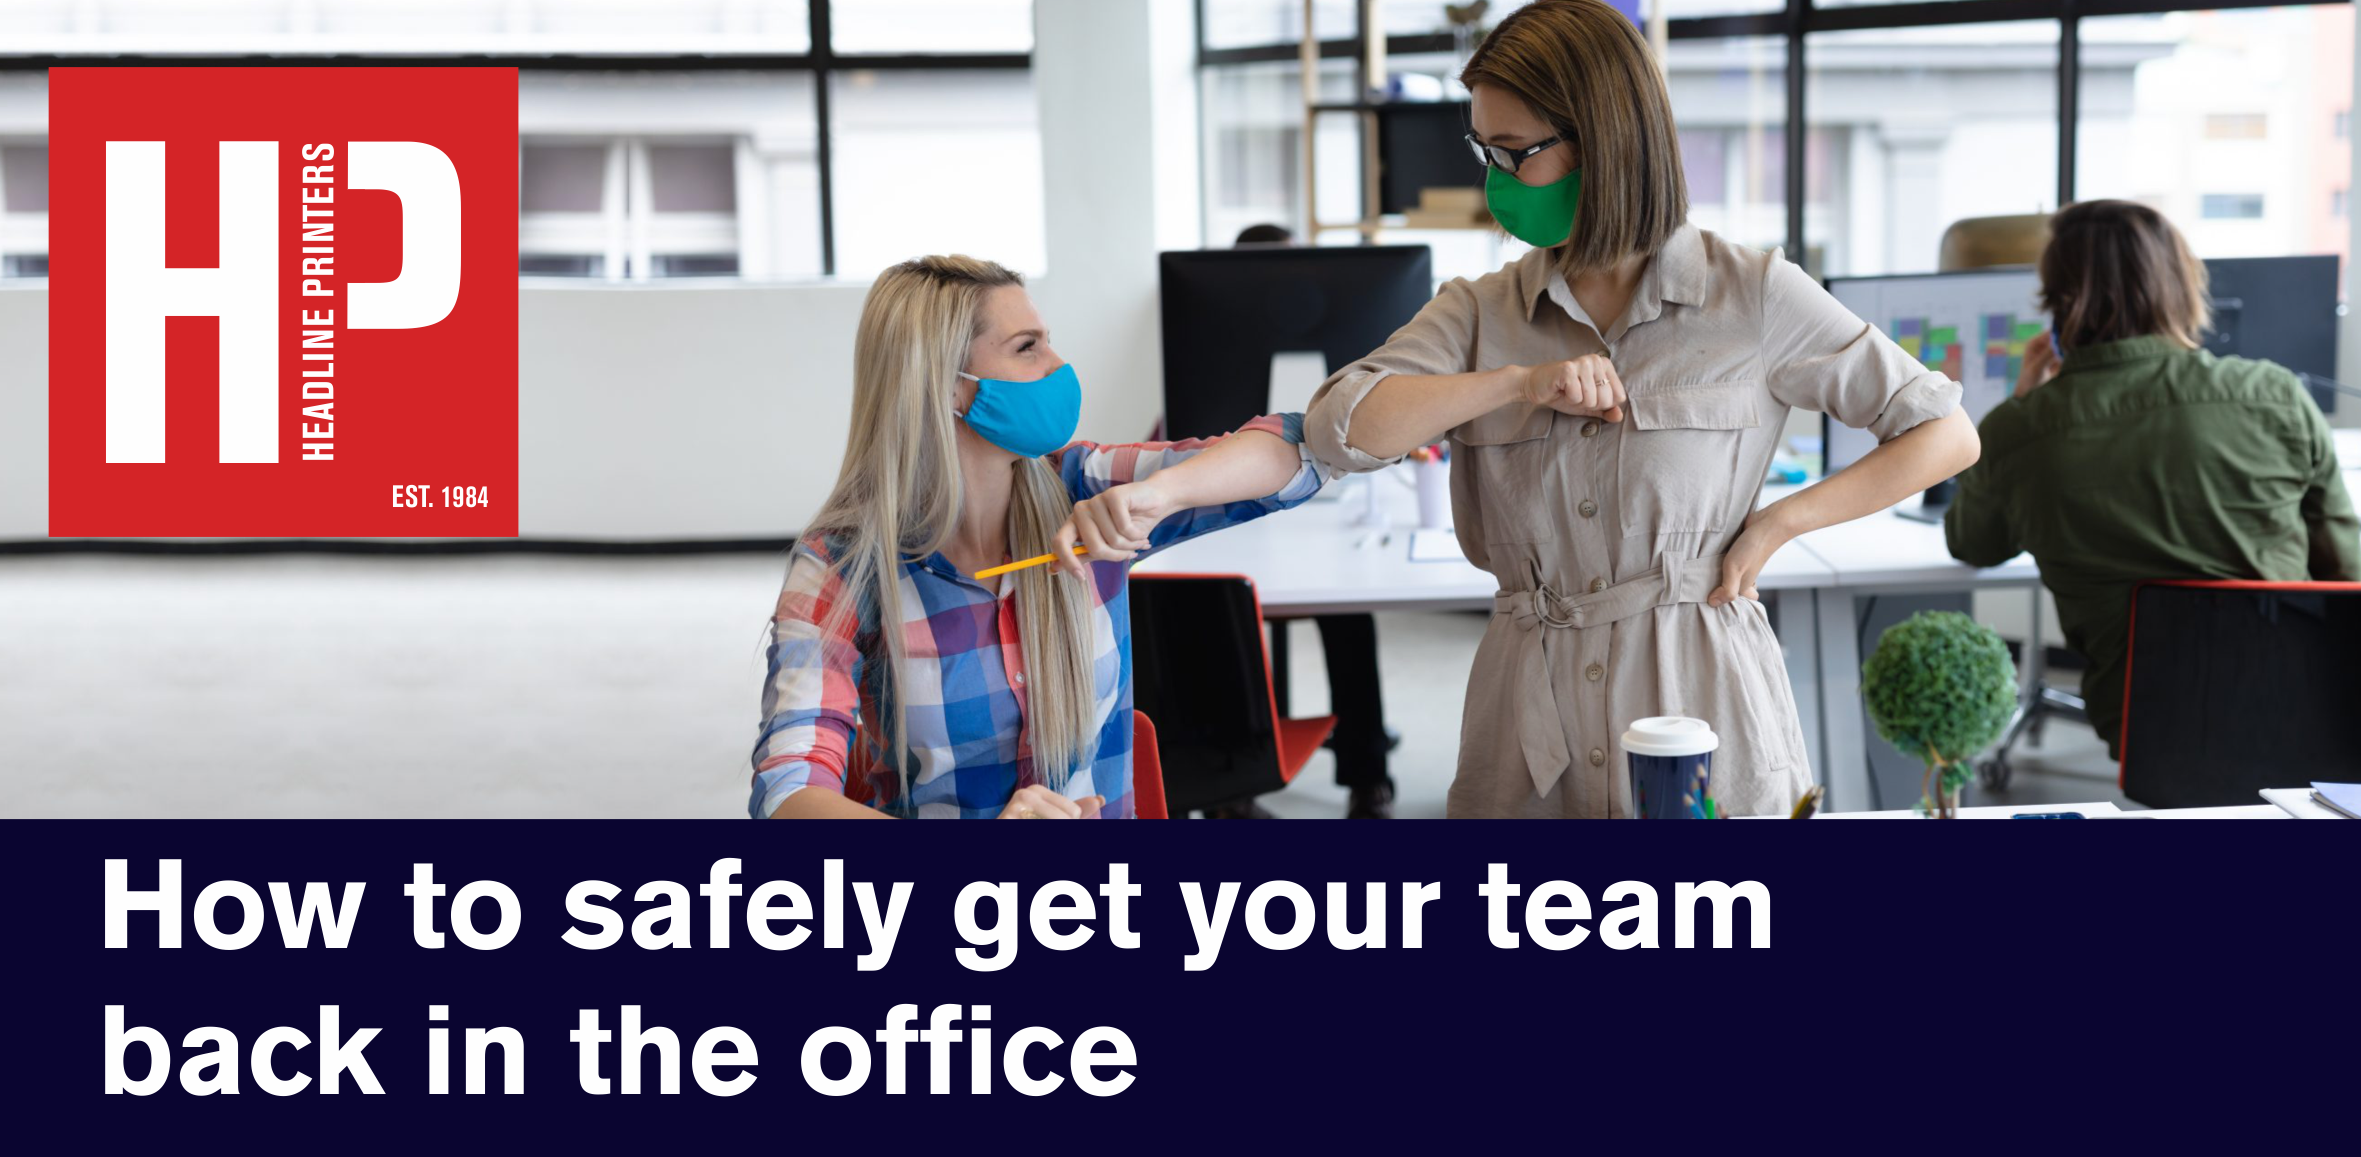 How to safely get your team back in the office